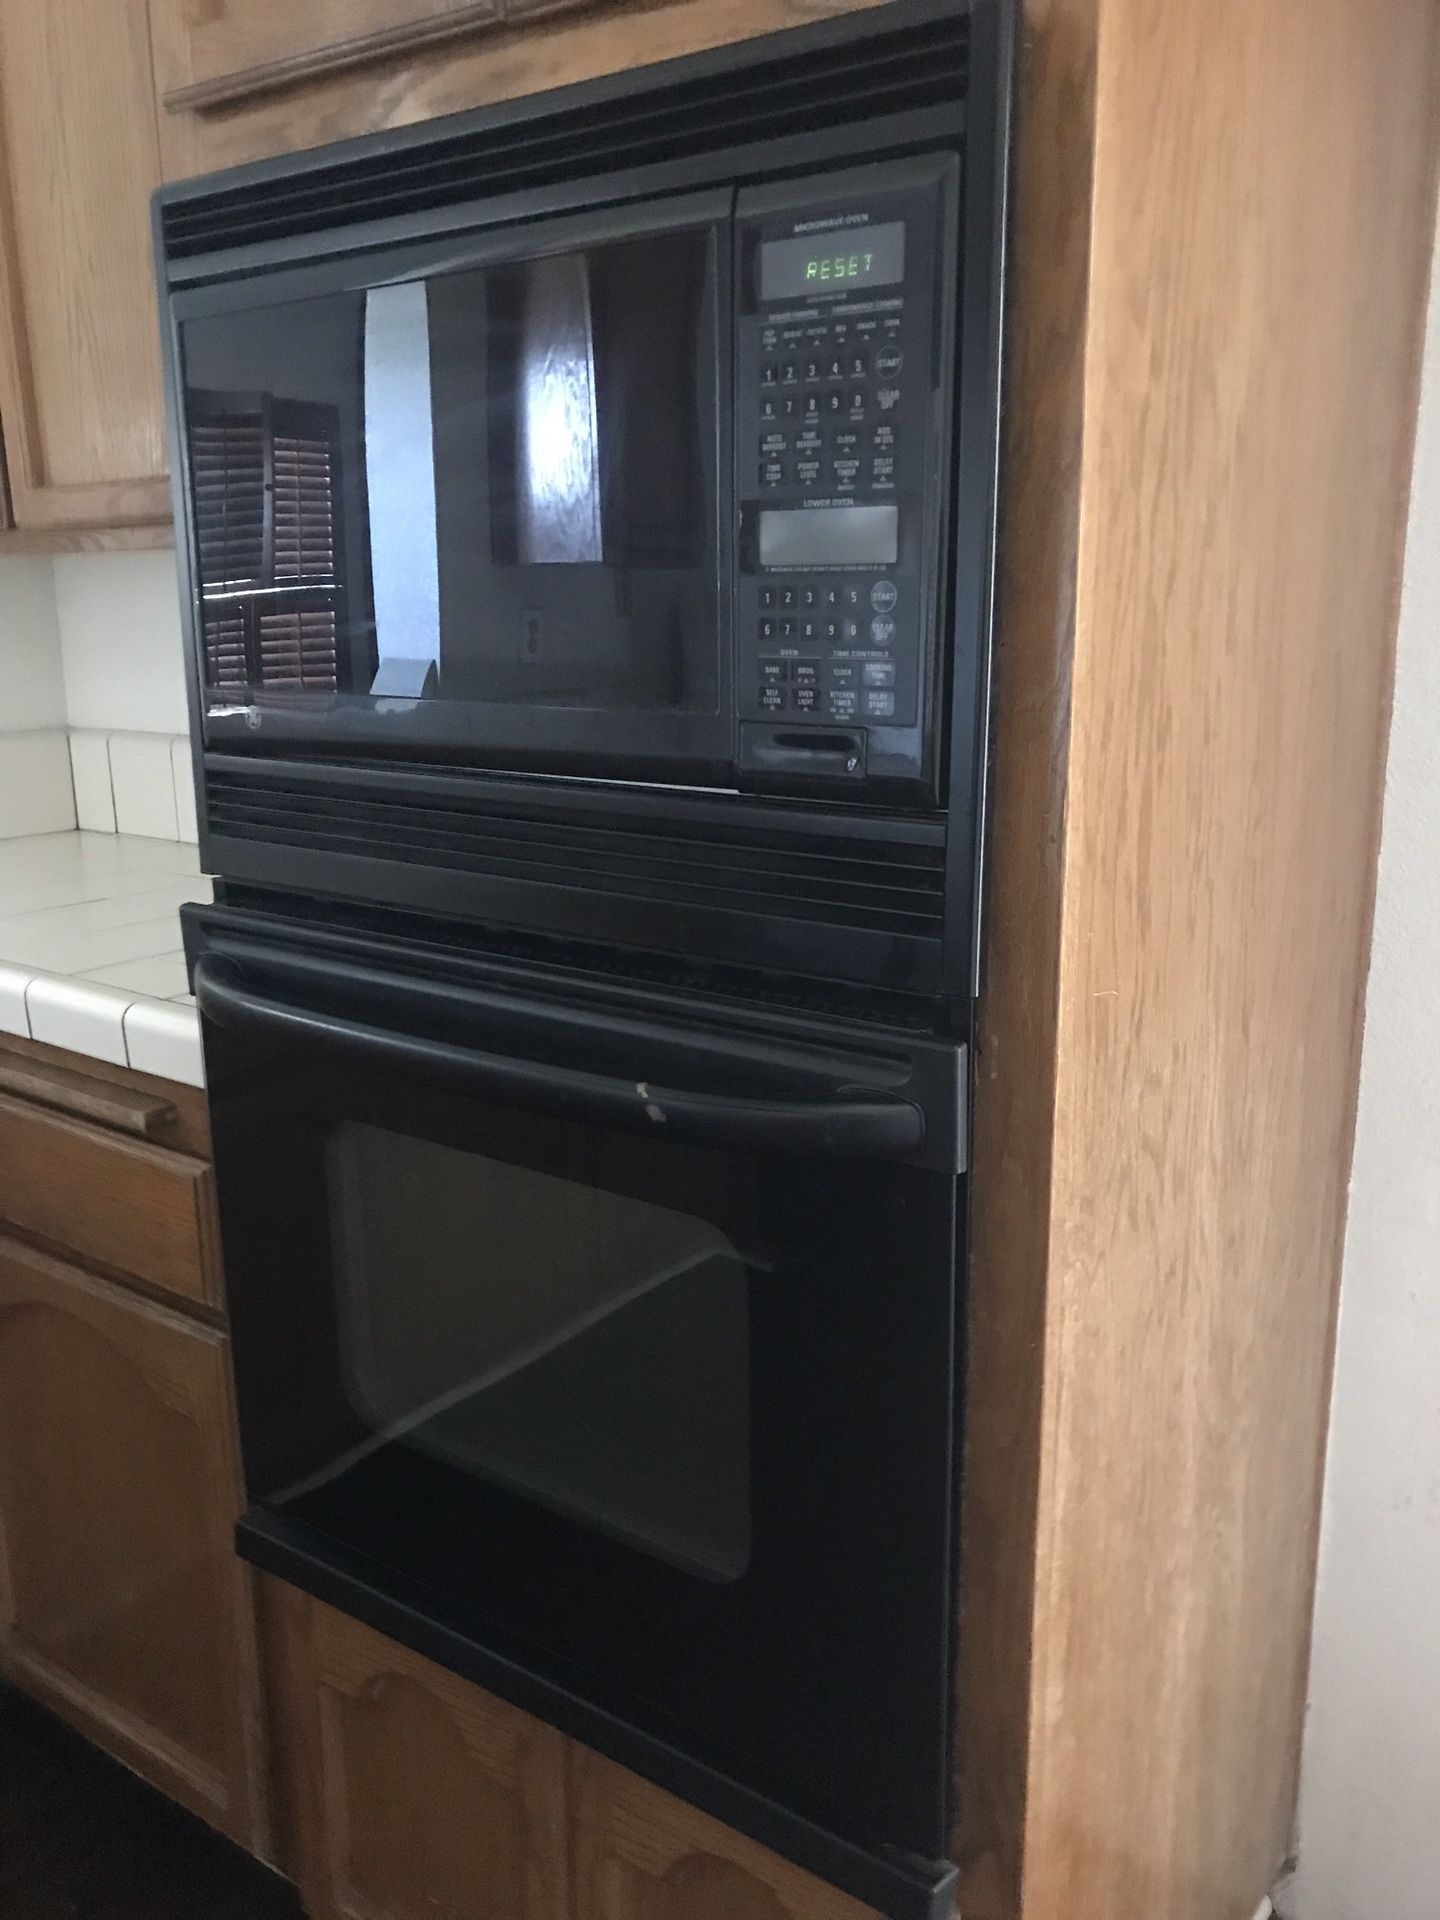 24 inch GE (General Electric) Wall Oven & Microwave Combo (used) works great - pick up in Rancho Cucamonga CA